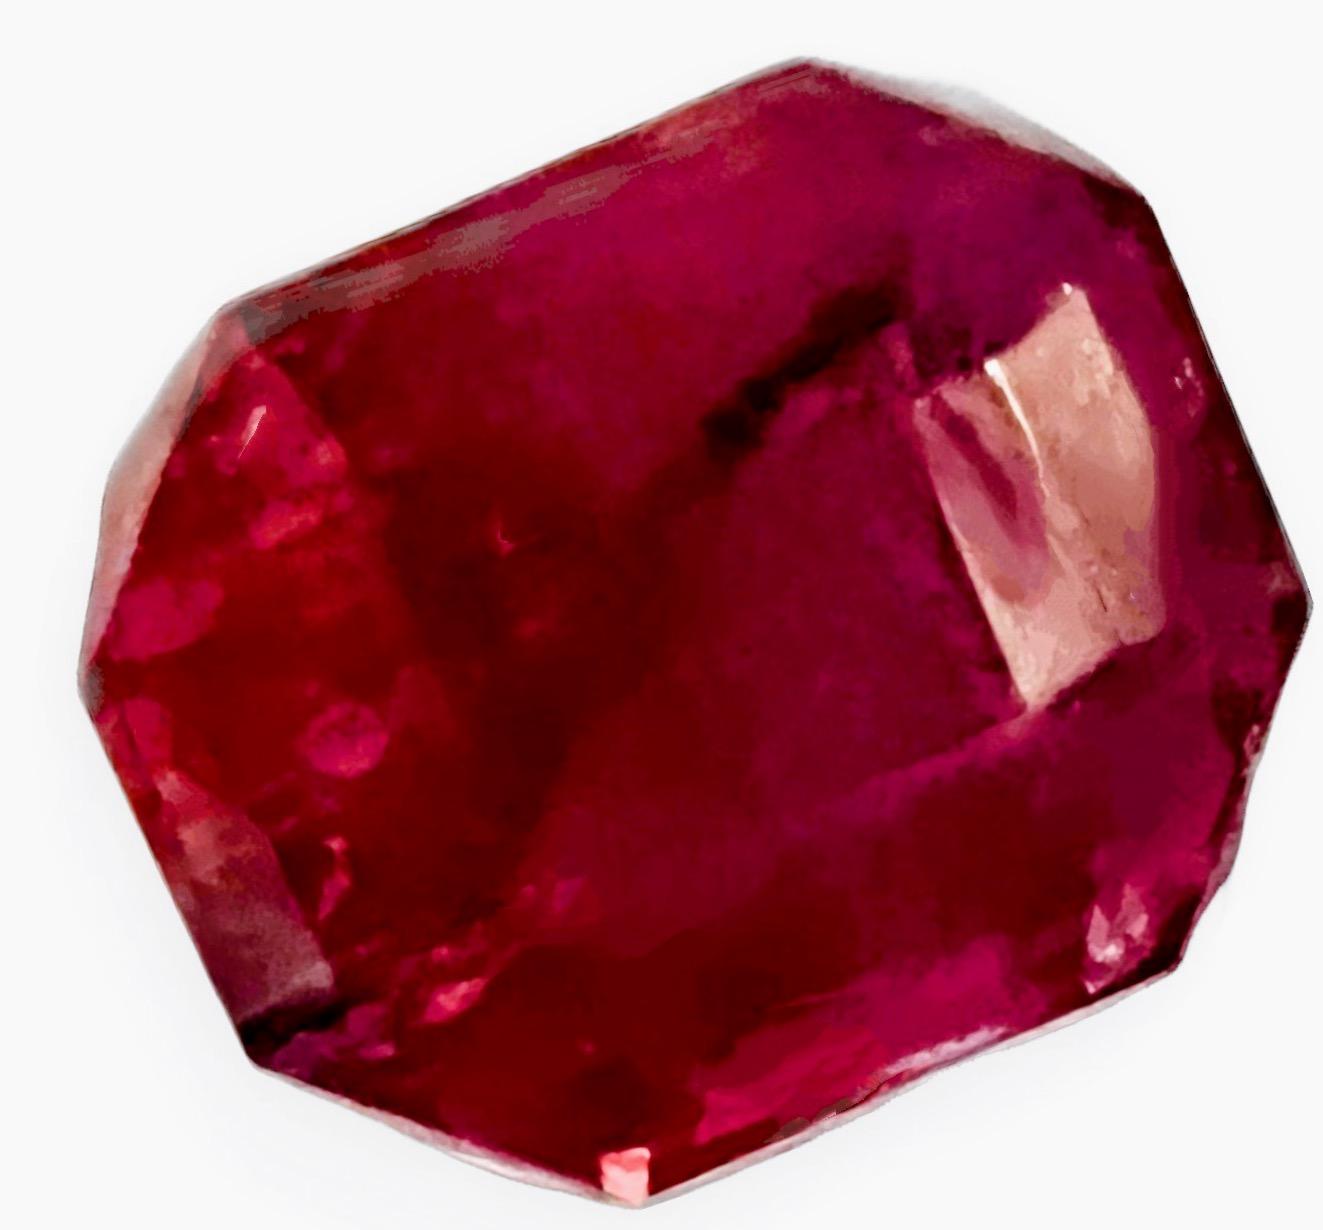 14.88ct Cushion Cut Intense Red Rubellite Tourmaline Gemstone  In New Condition For Sale In Sheridan, WY